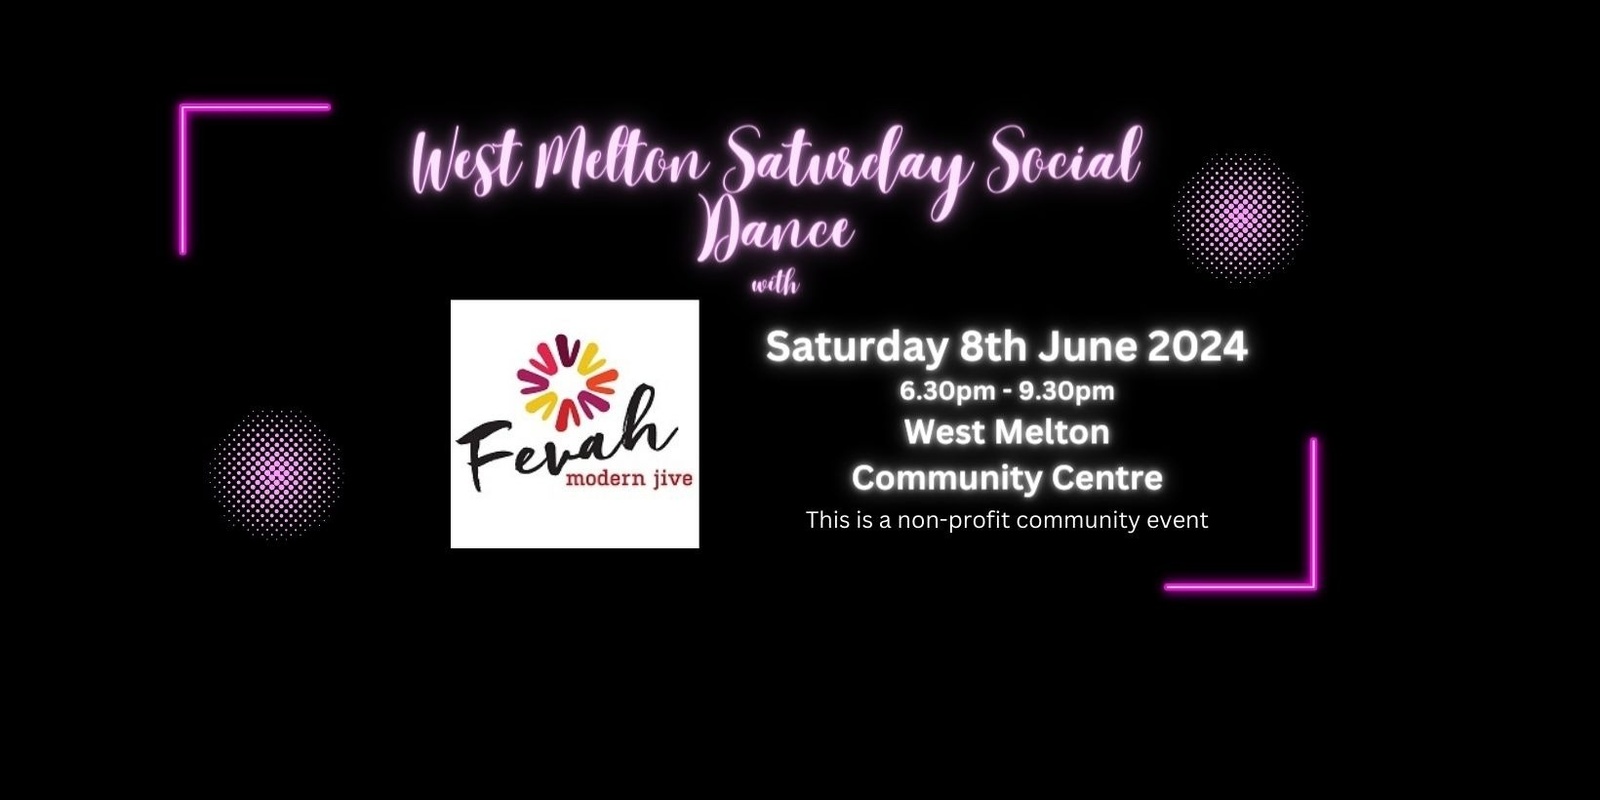 Banner image for Saturday Social Dance with Fevah Modern Jive